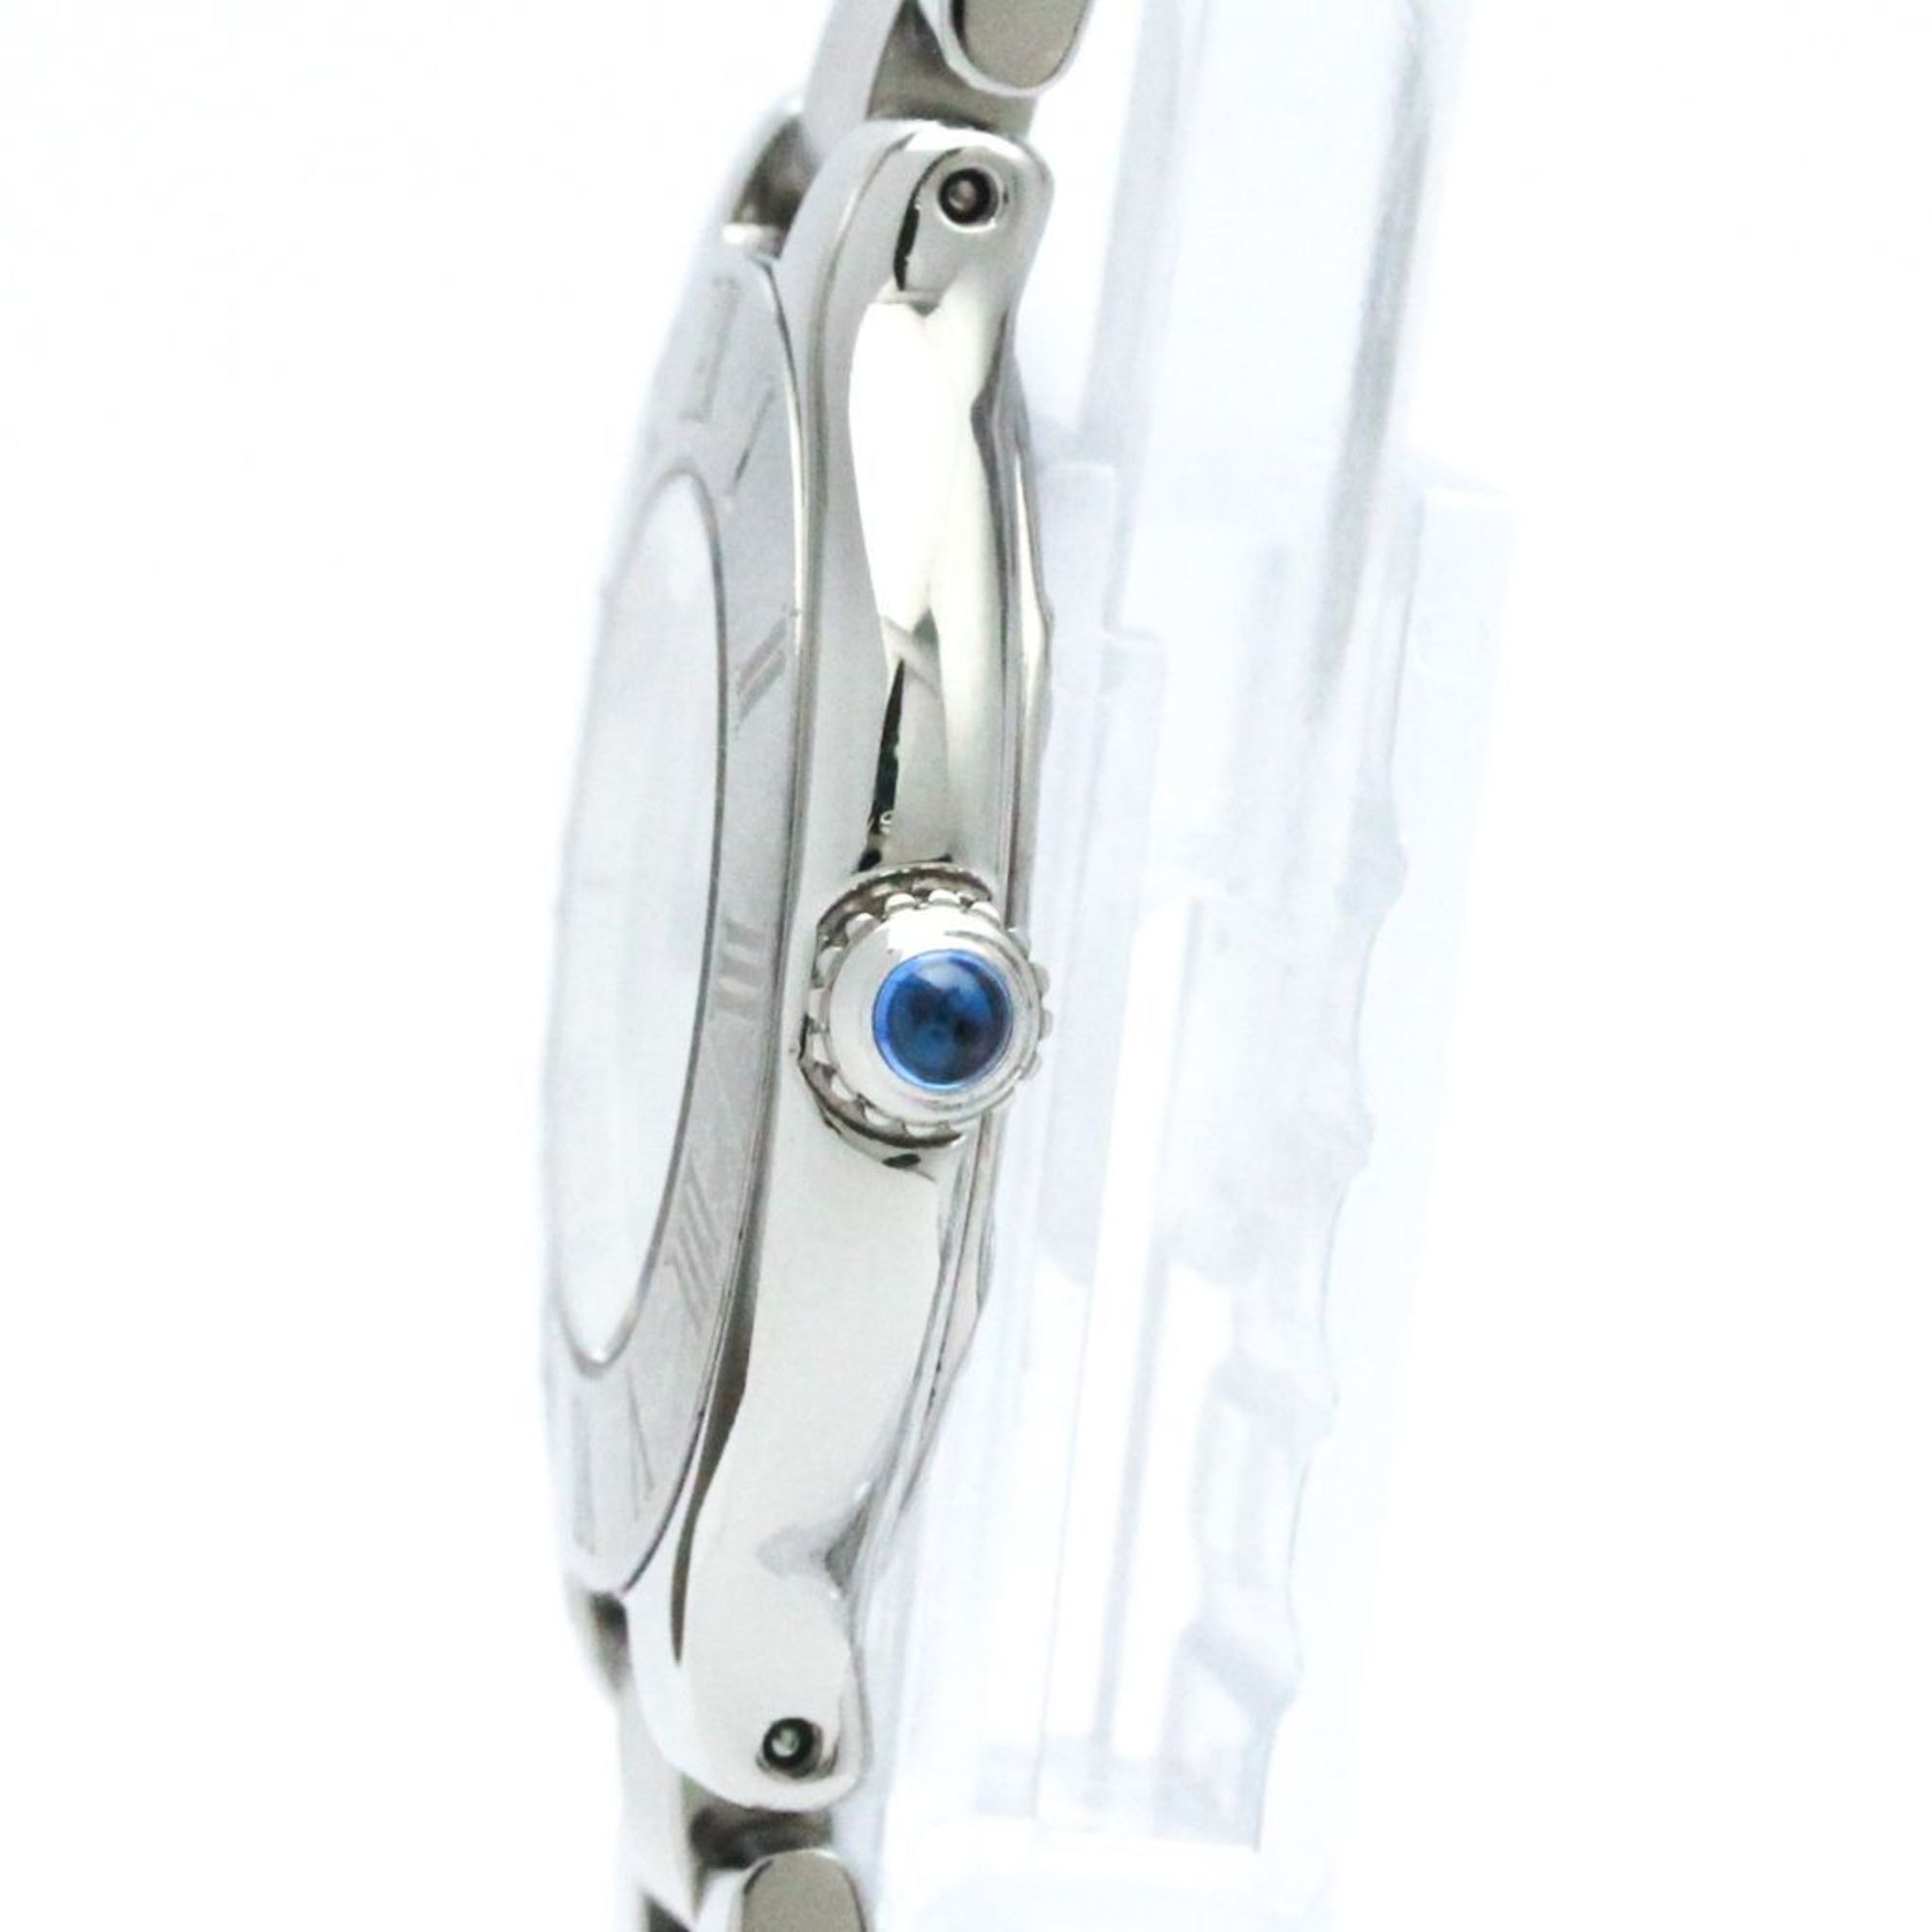 Polished CARTIER Must 21 Stainless Steel Quartz Ladies Watch W10109T2 BF571614